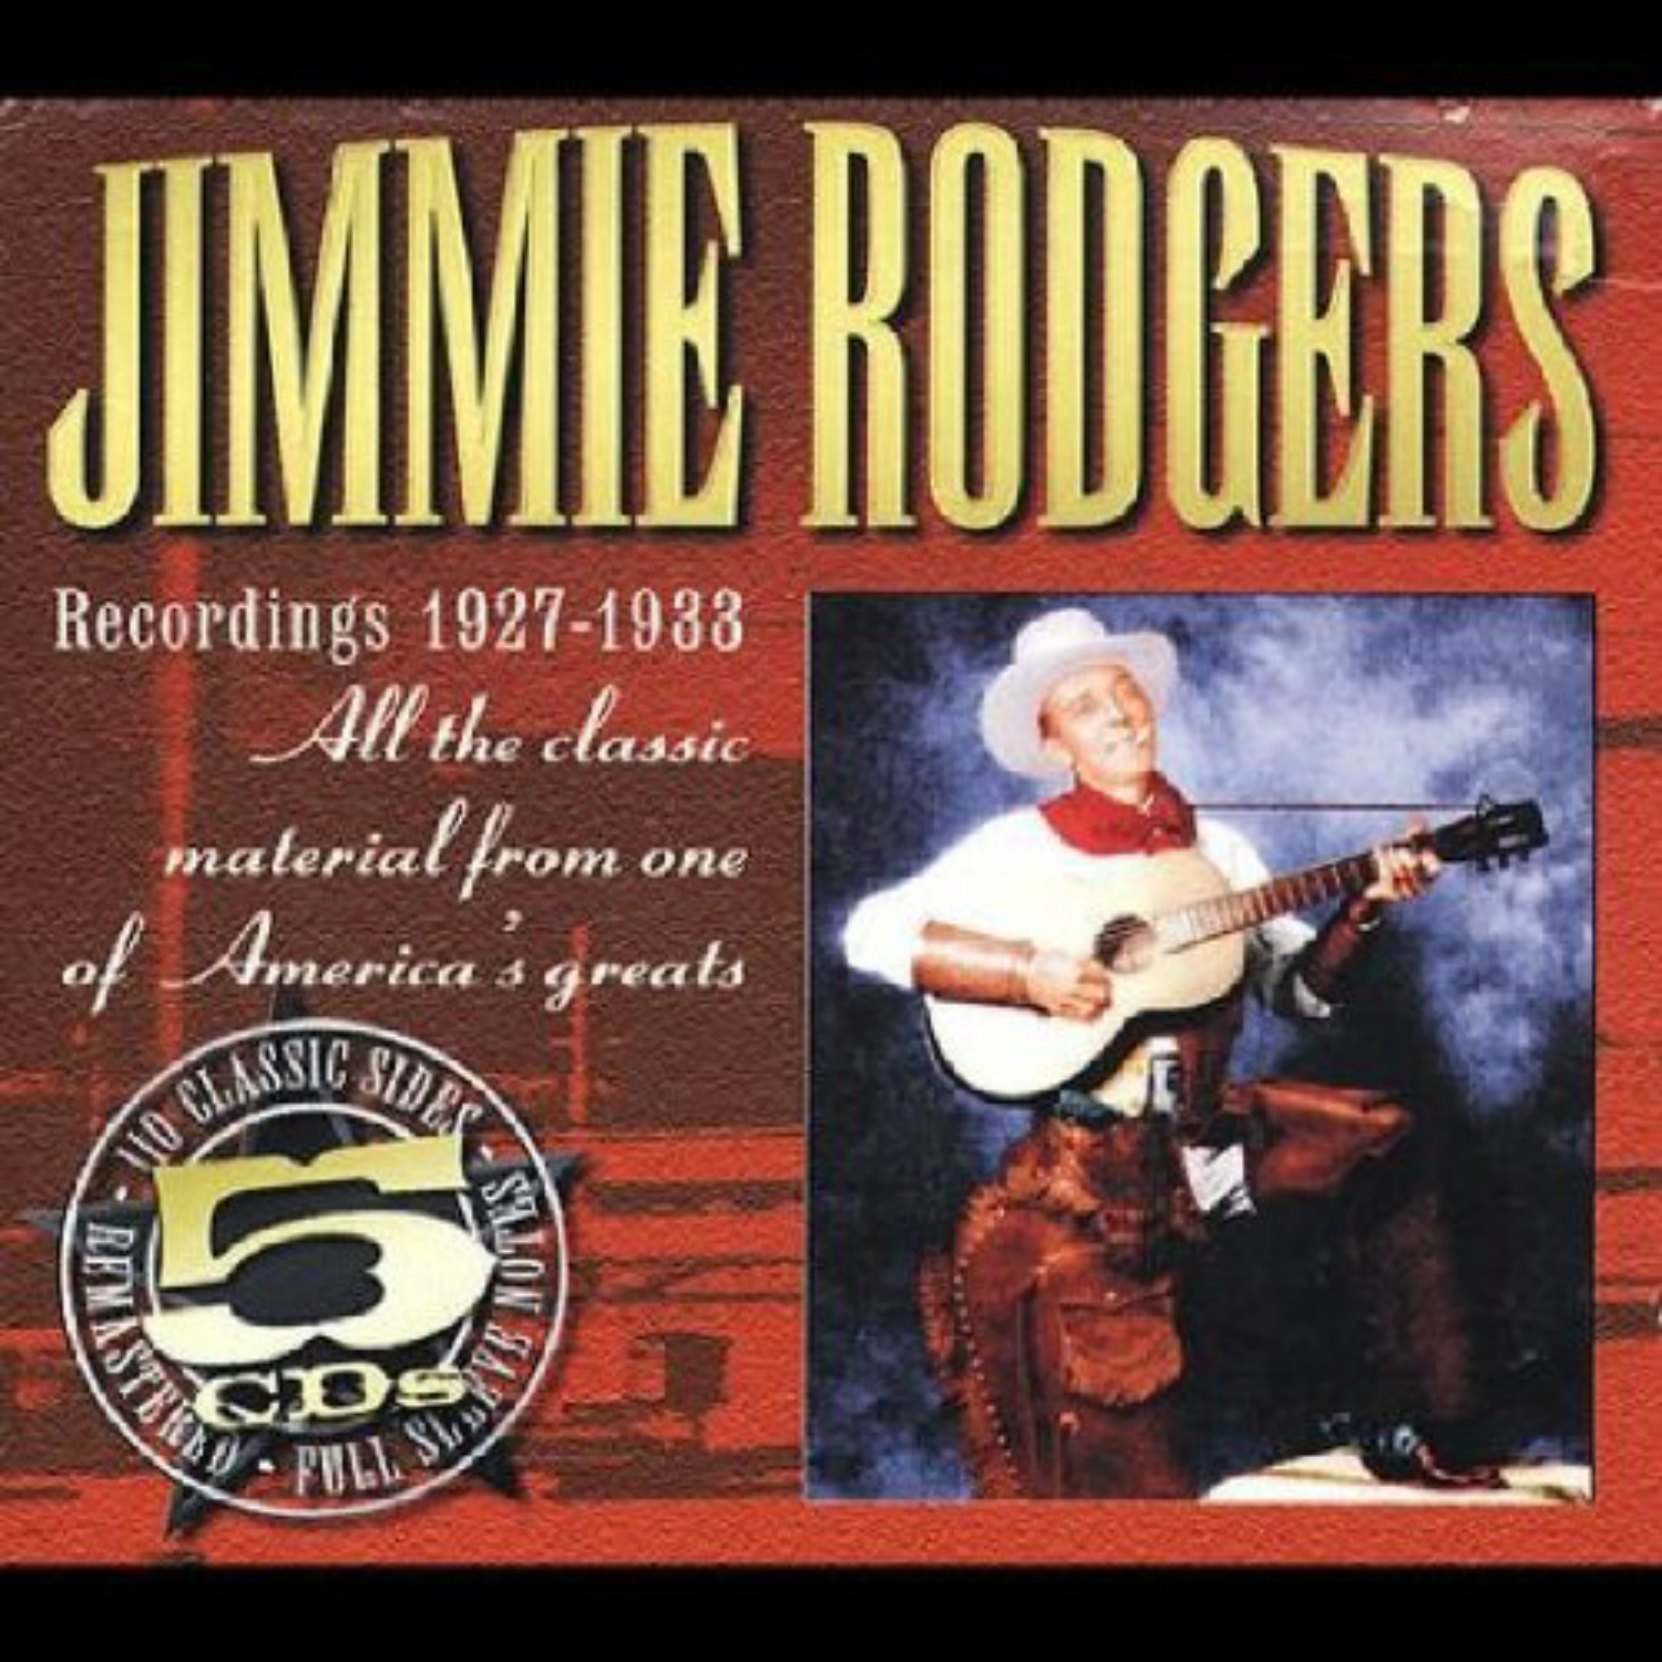 CD cover, Jimmie Rodgers Recordings 1927-1933, a 5 CD, 110 track, box set released on JSP Records